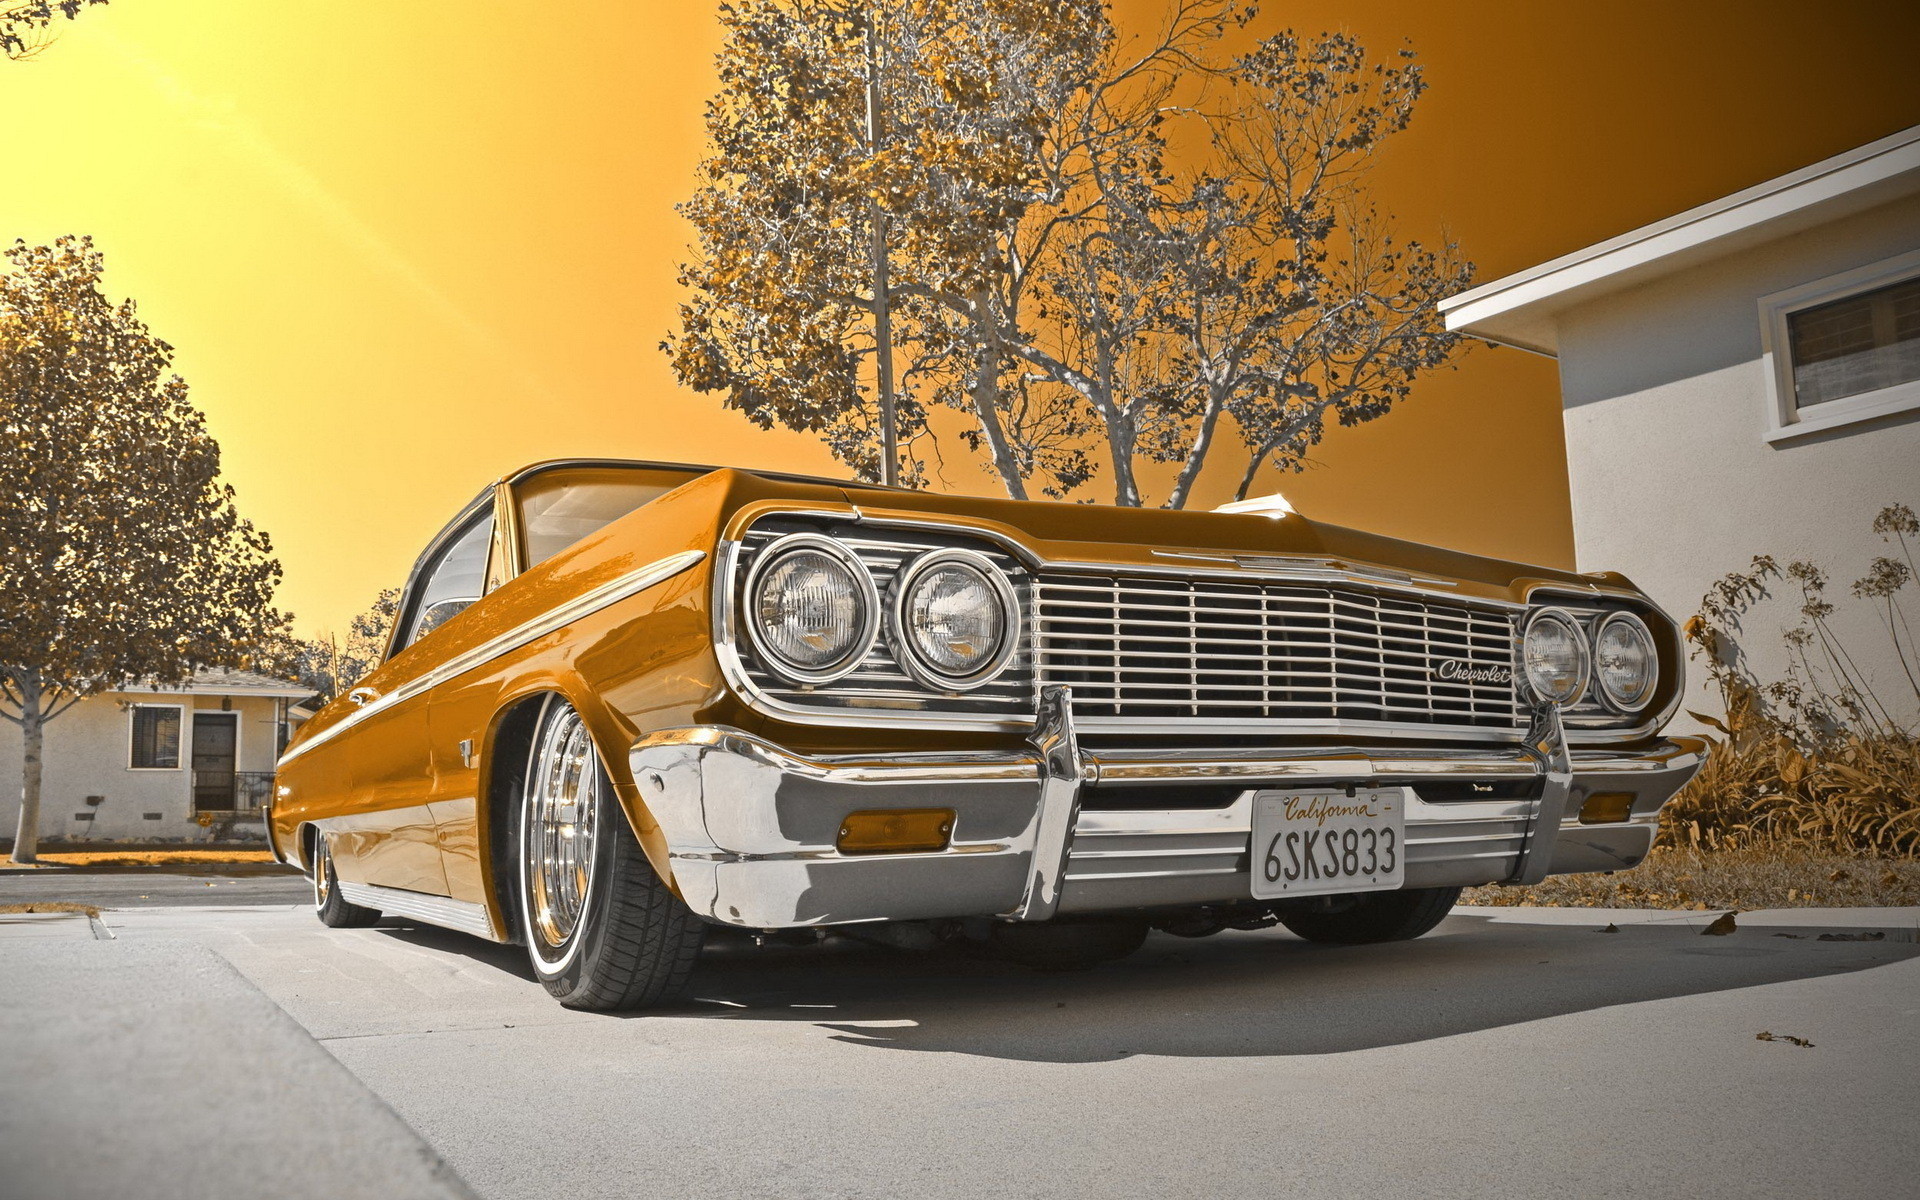 Lowrider Wallpaper Browse Lowrider Wallpaper with collections of Black  Blue impala Logo Lowrider httpswwwidlewpcoml  Lowriders  Wallpaper Color design